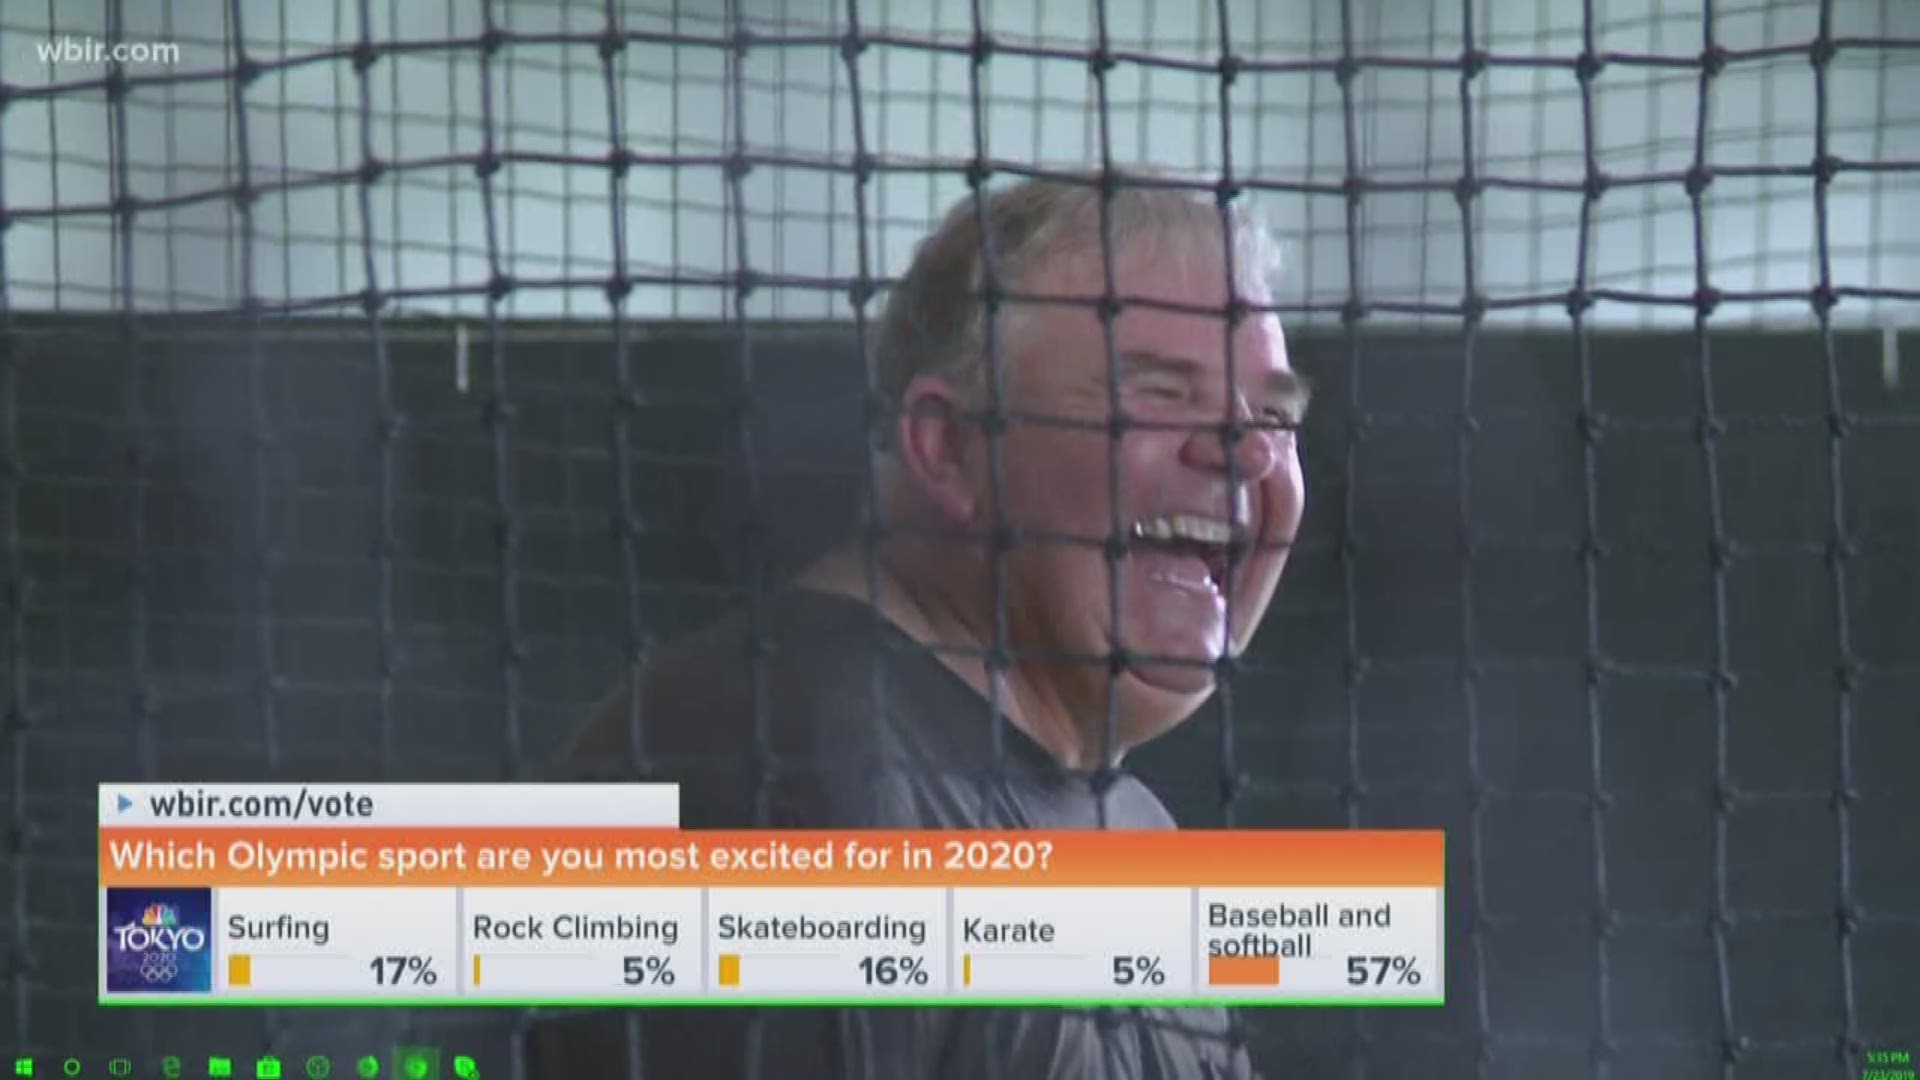 UT softball coach Ralph Weekly was the director of the national team for the 2000 Olympics in Sydney and was the hitting coach on the first-ever USA softball Olympic team that took the gold in 19-96.
10Sports anchor Patrick Murray took a few swings with him in the cages.